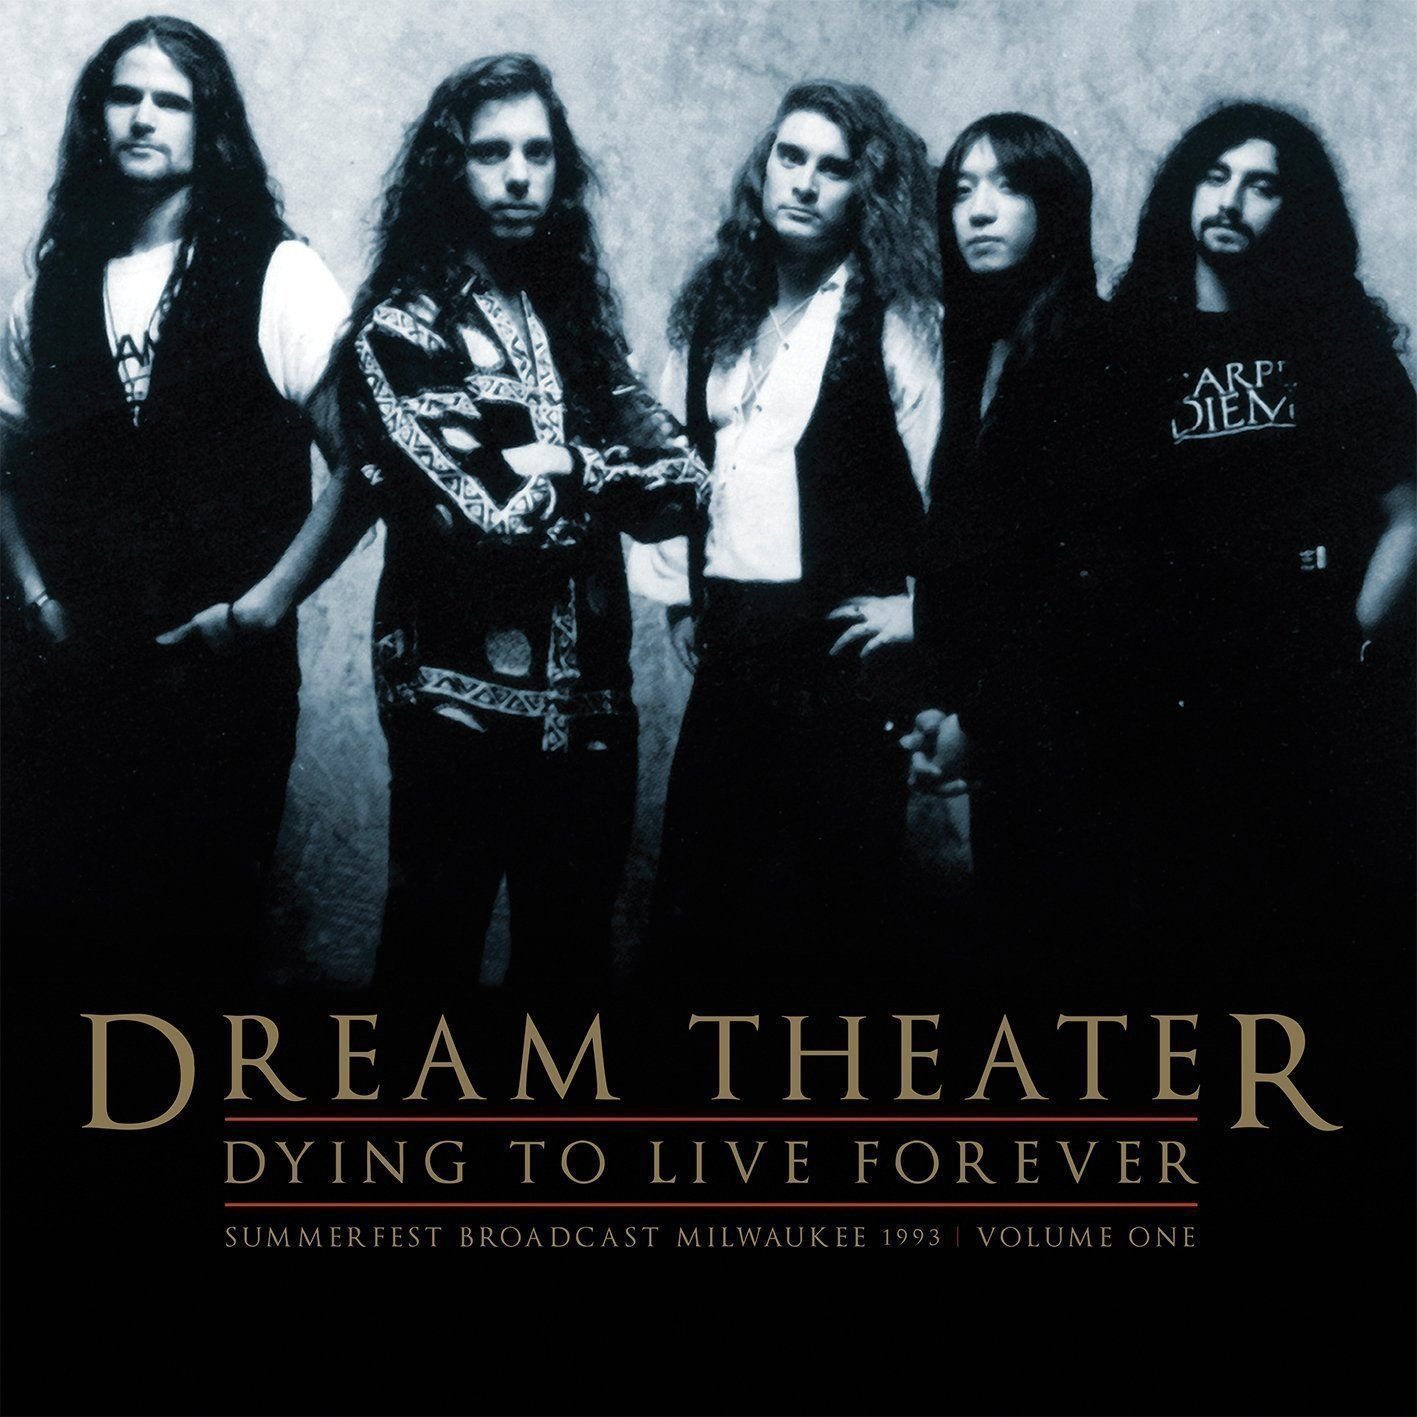 LP ploča Dream Theater - Dying To Live Forever - Milwaukee 1993 Vol. 1 (2 LP)